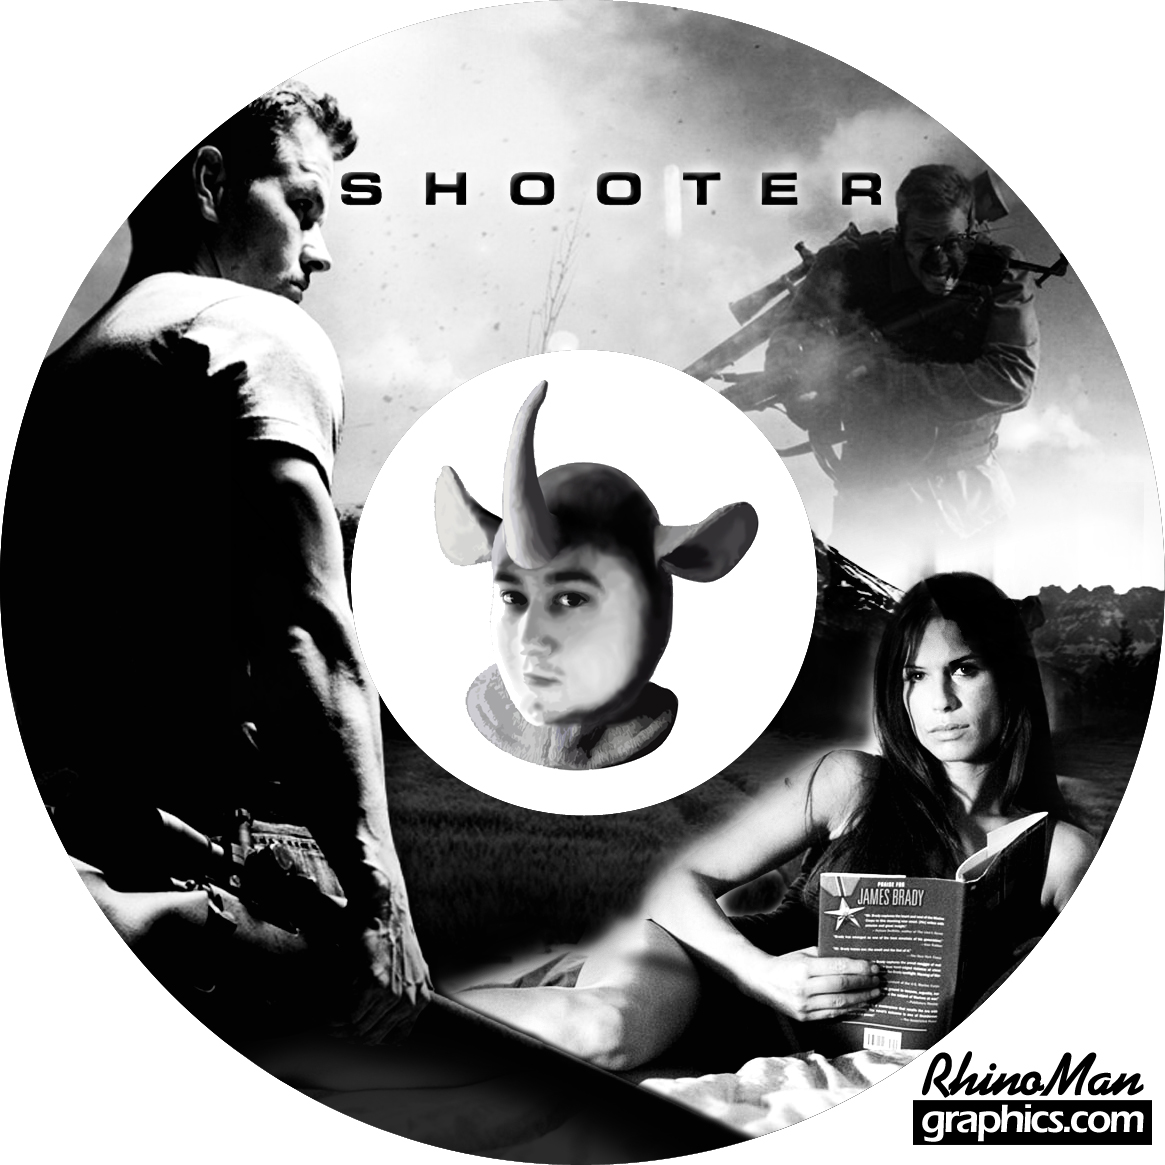 for the DVD movie Shooter